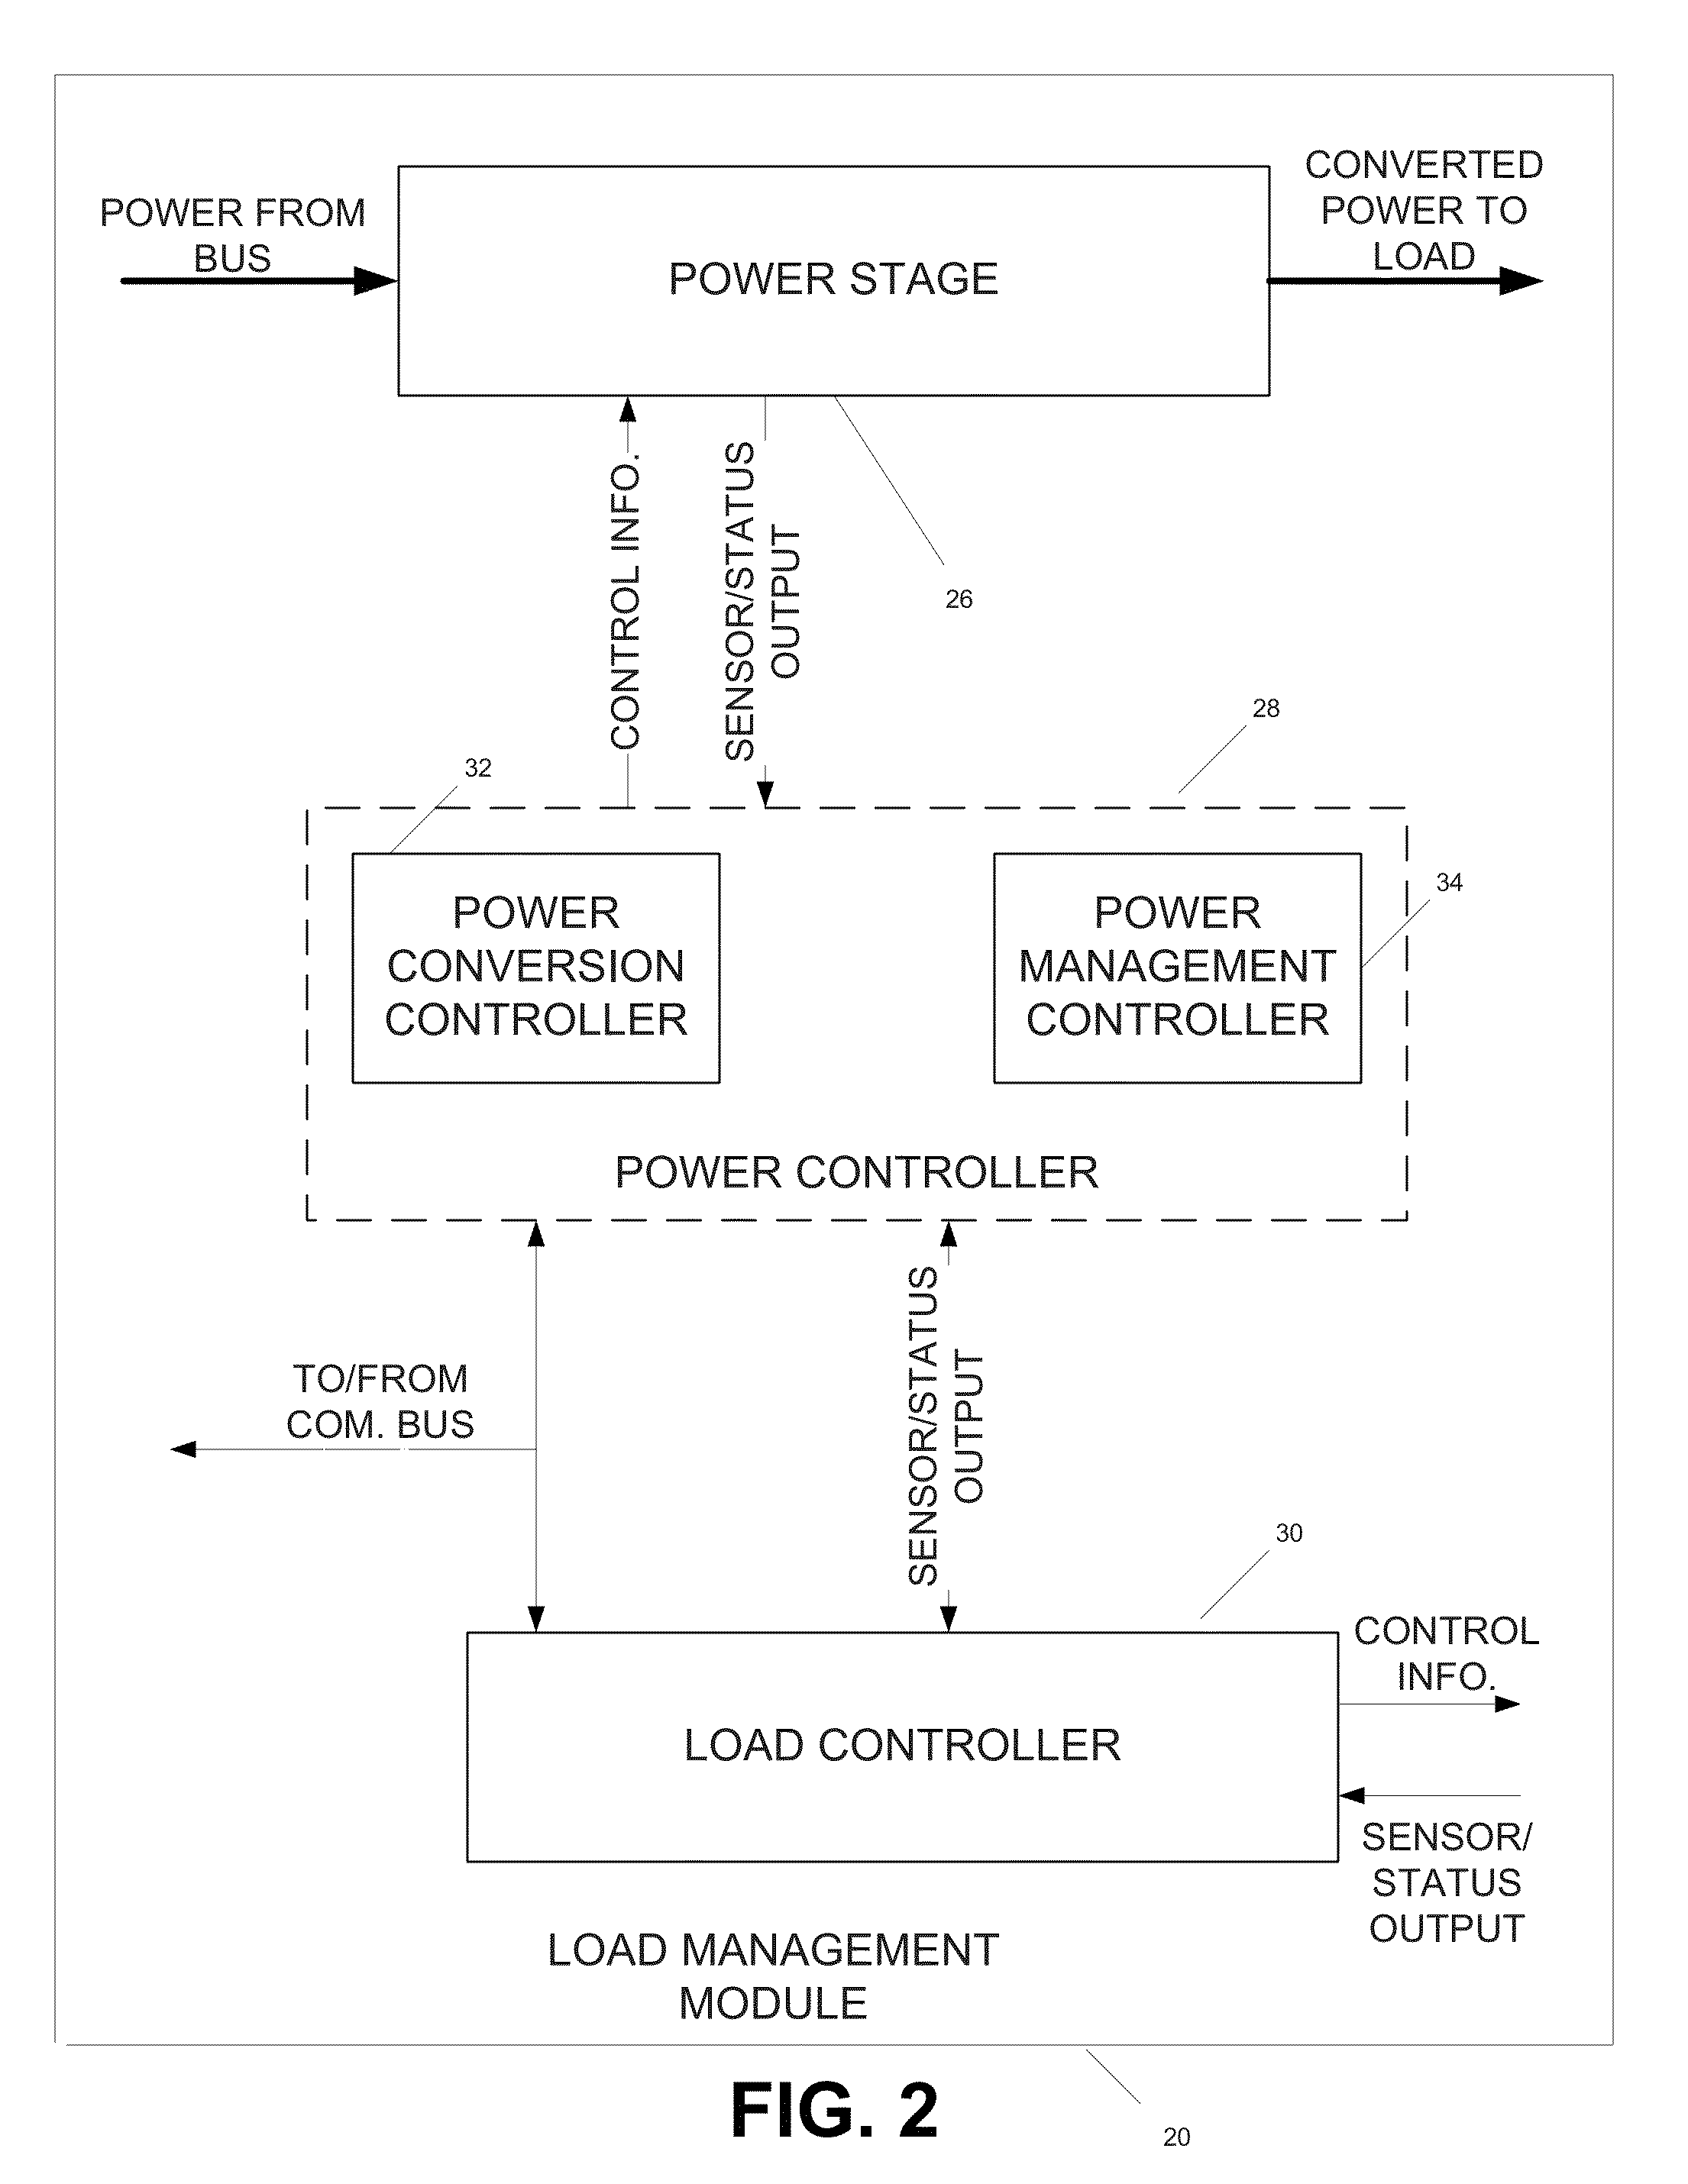 System configured to control and power a vehicle or vessel